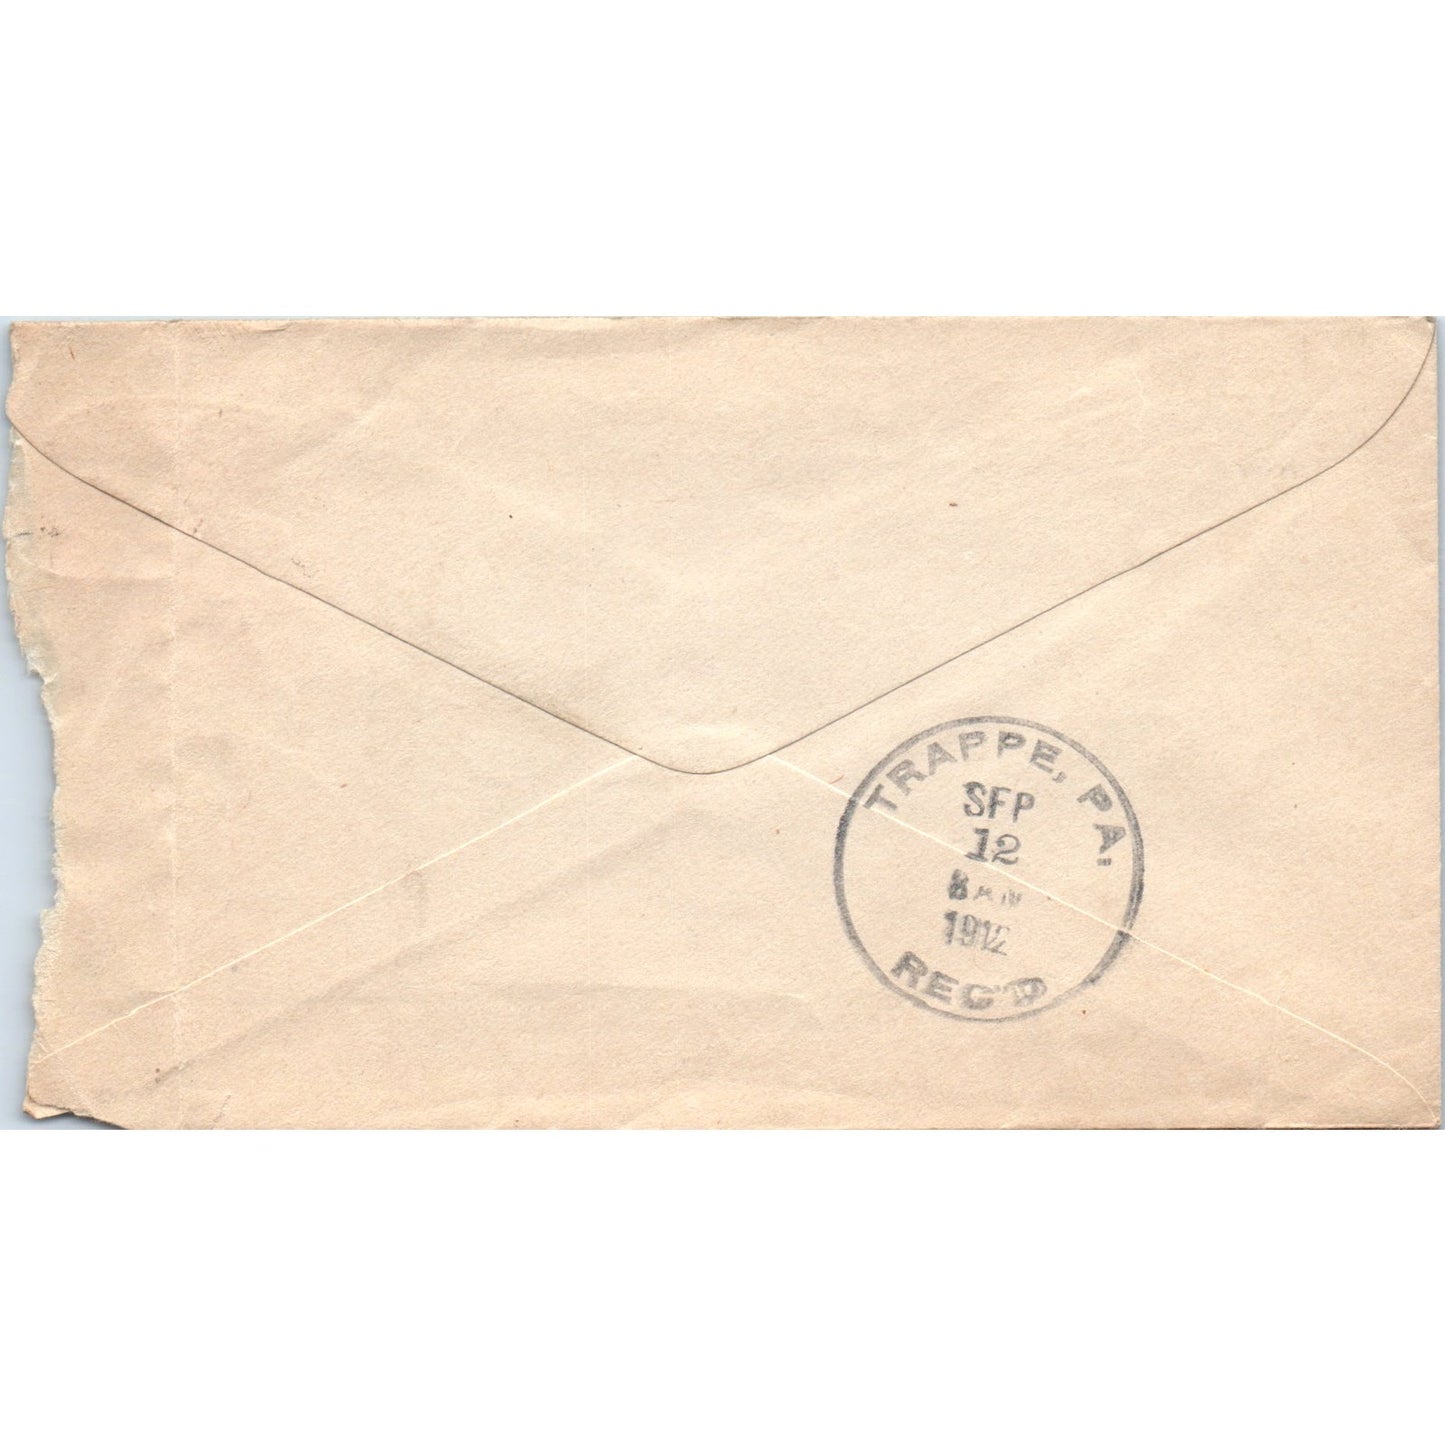 1912 Lee National Bank to Jane G. Rambo Trappe PA Postal Cover Envelope TG7-PC2